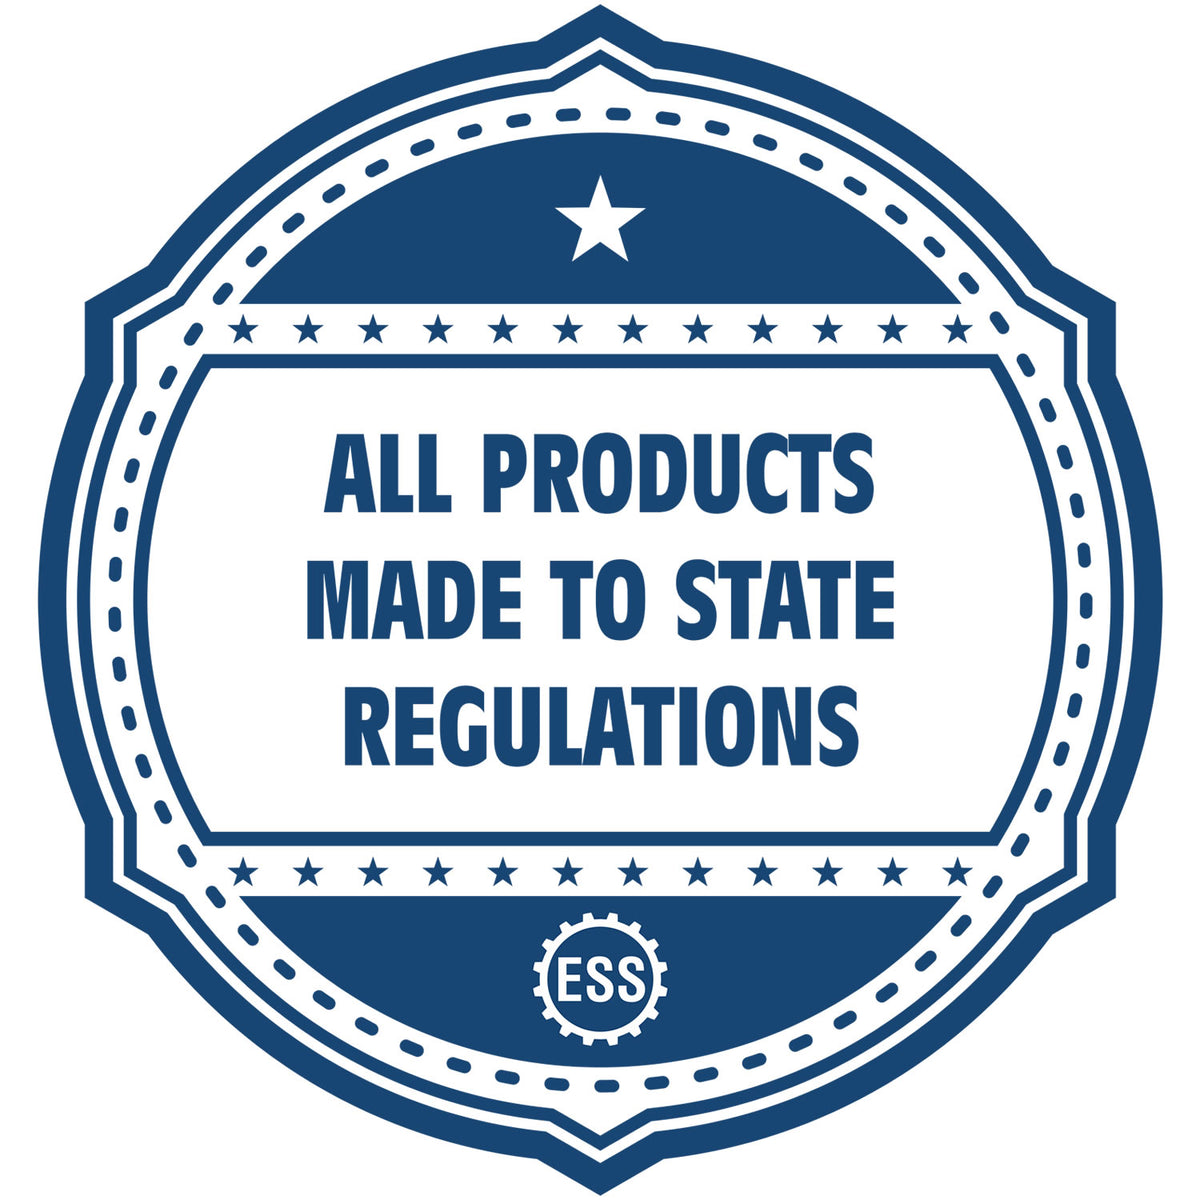 An icon or badge element for the Slim Pre-Inked Maryland Architect Seal Stamp showing that this product is made in compliance with state regulations.